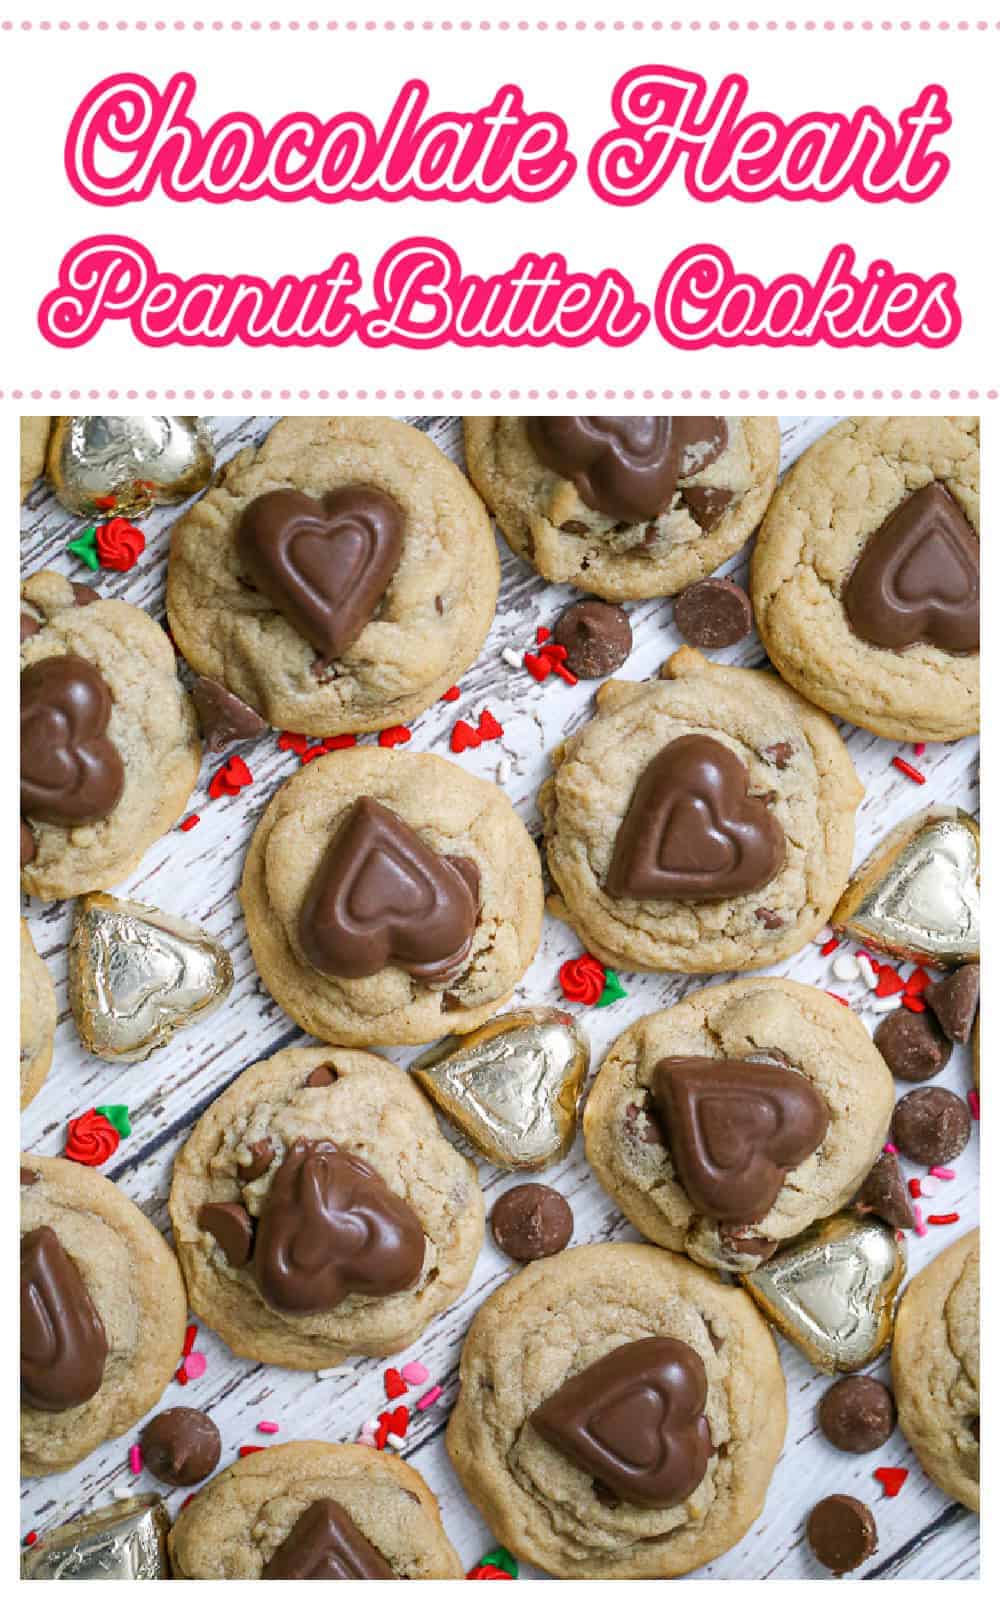 Chocolate Heart Peanut Butter Cookies recipe for valentine's day